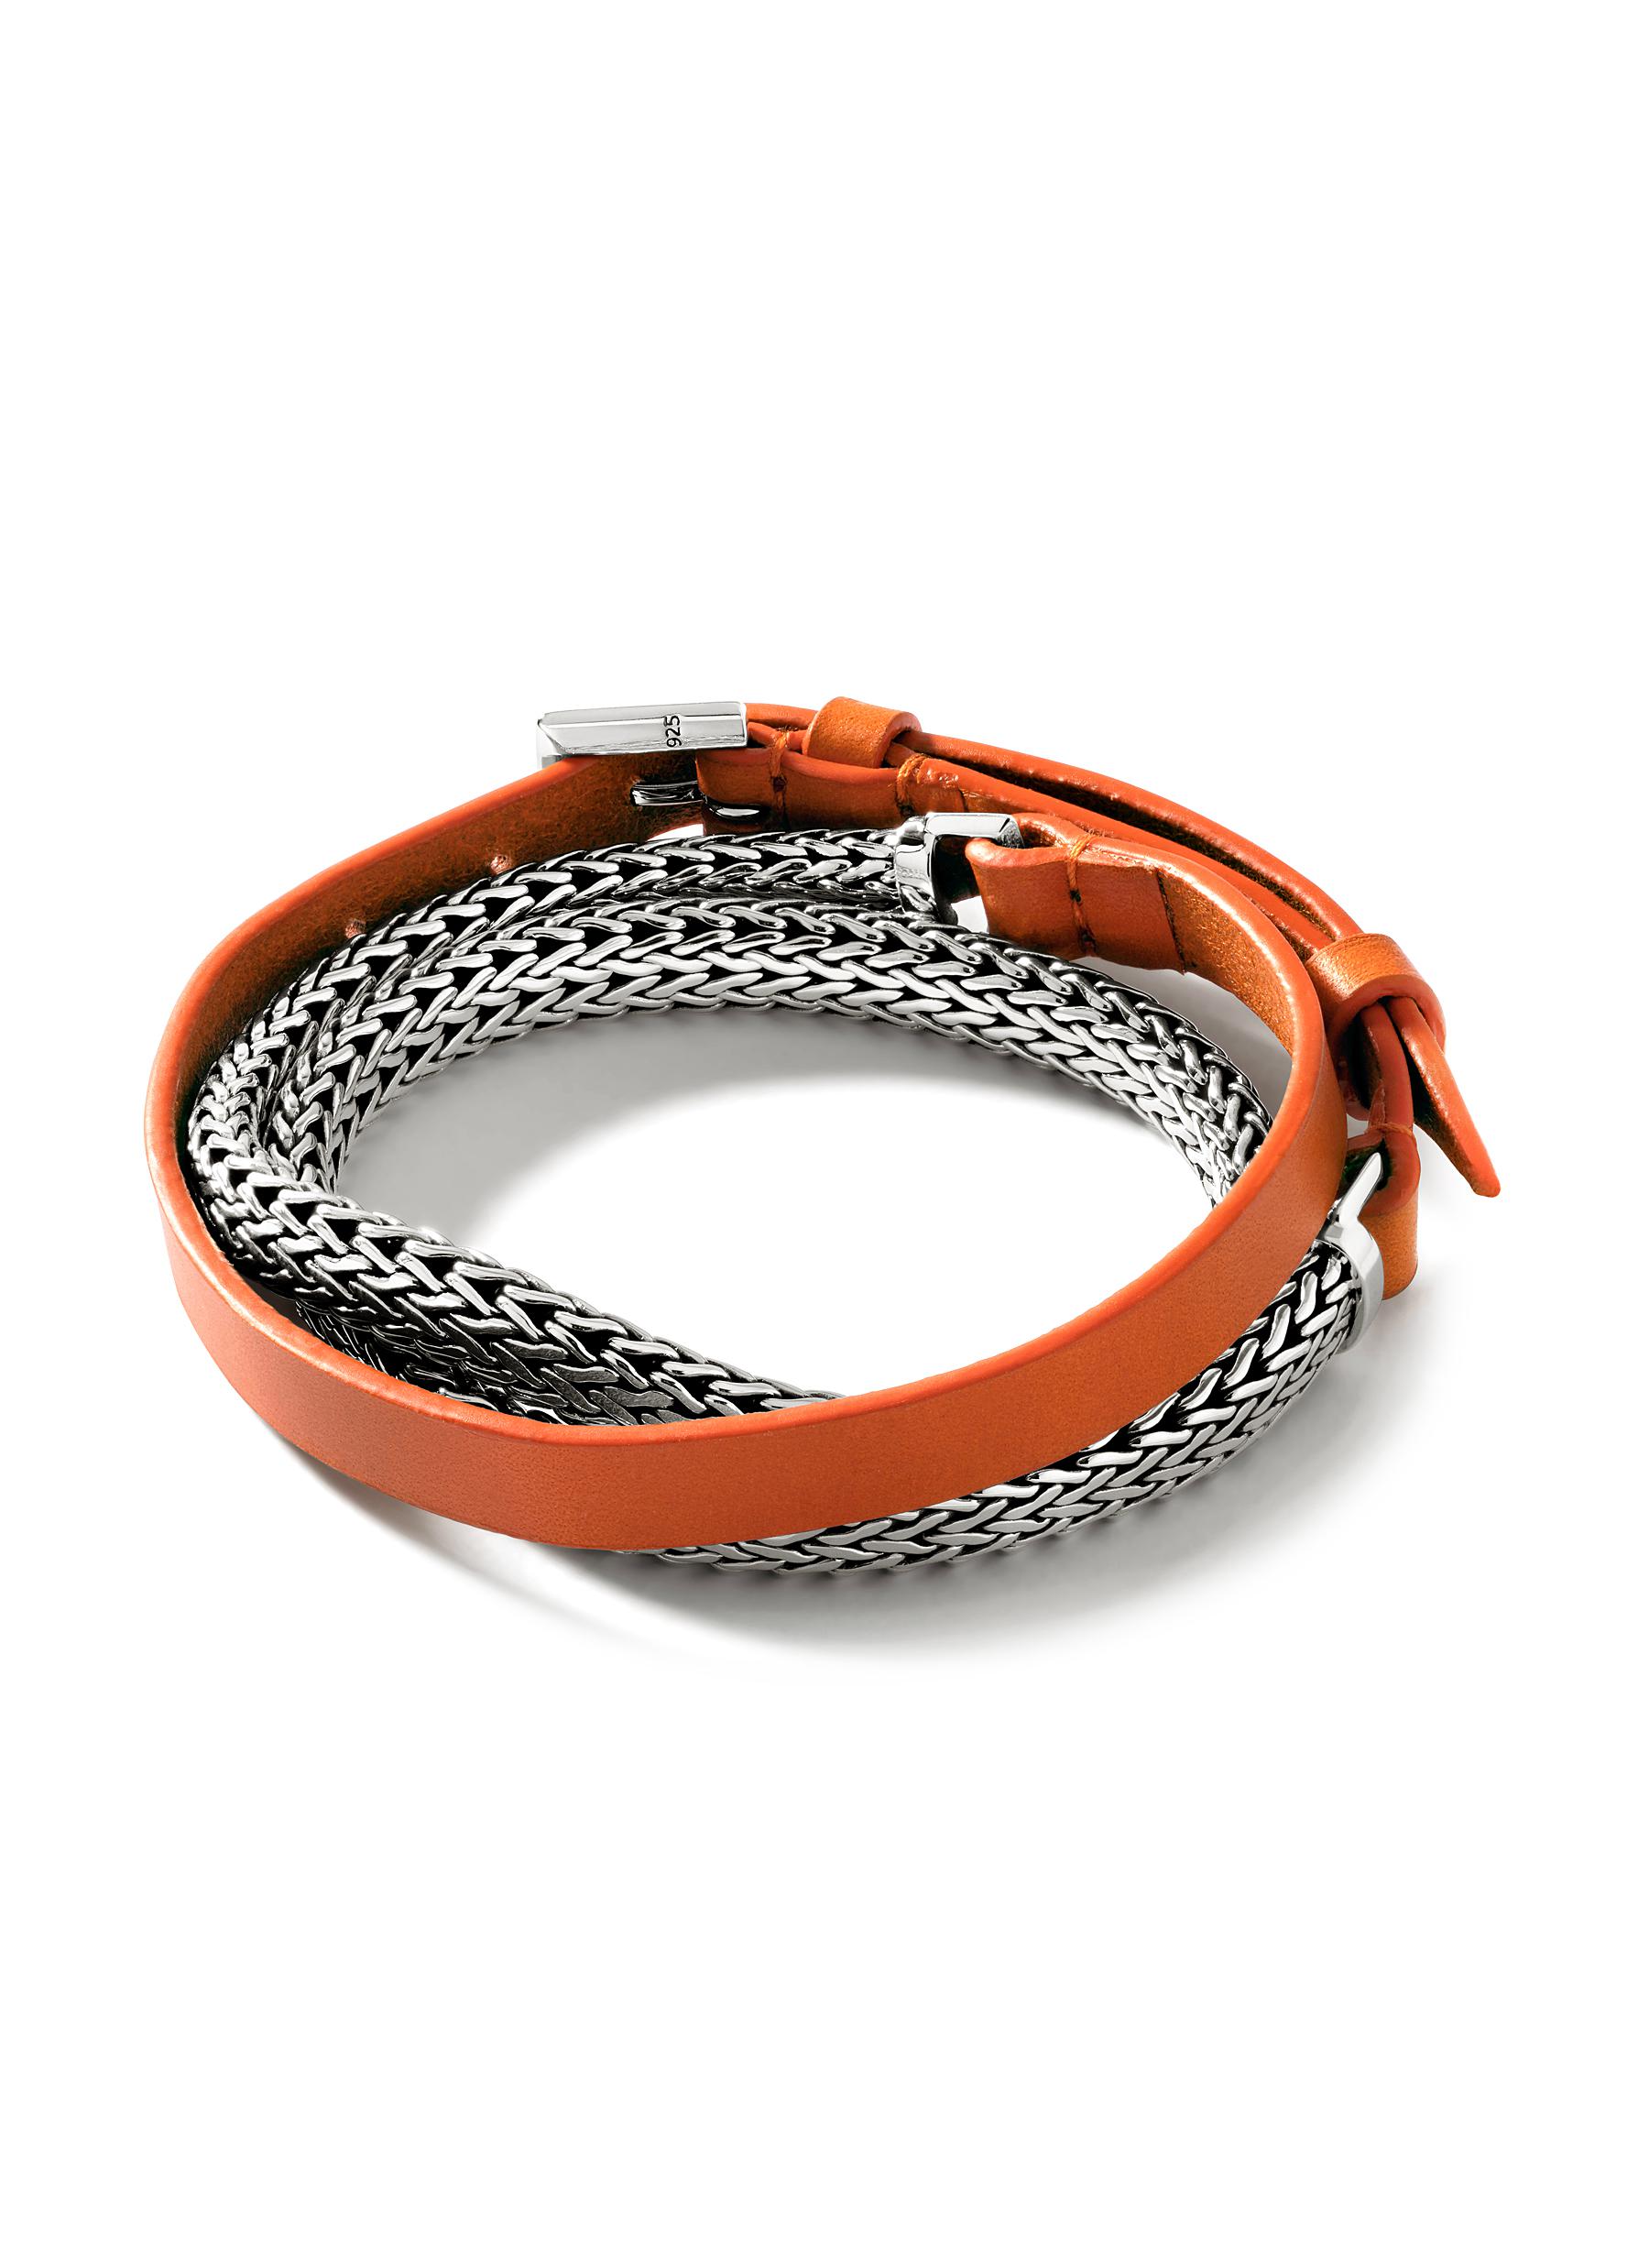 Leather Wrap Bracelet Boho Stackable Cuff Bracelets with Magnetic Clasp  Accessories Jewelry Gifts for Women Teen Girls - Walmart.com